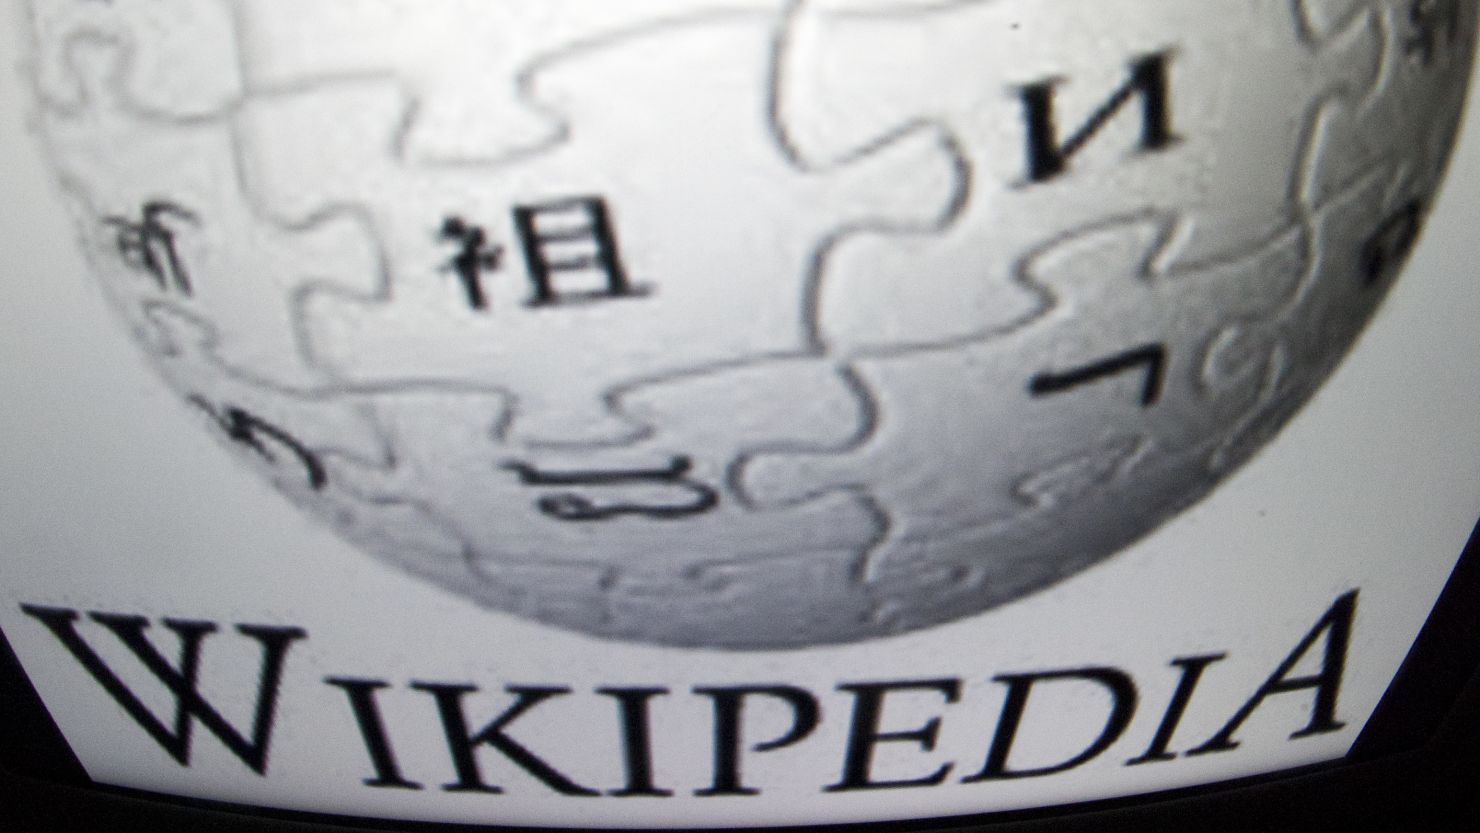 The Turkish government says it warned Wikipedia to remove the content, but the site refused.